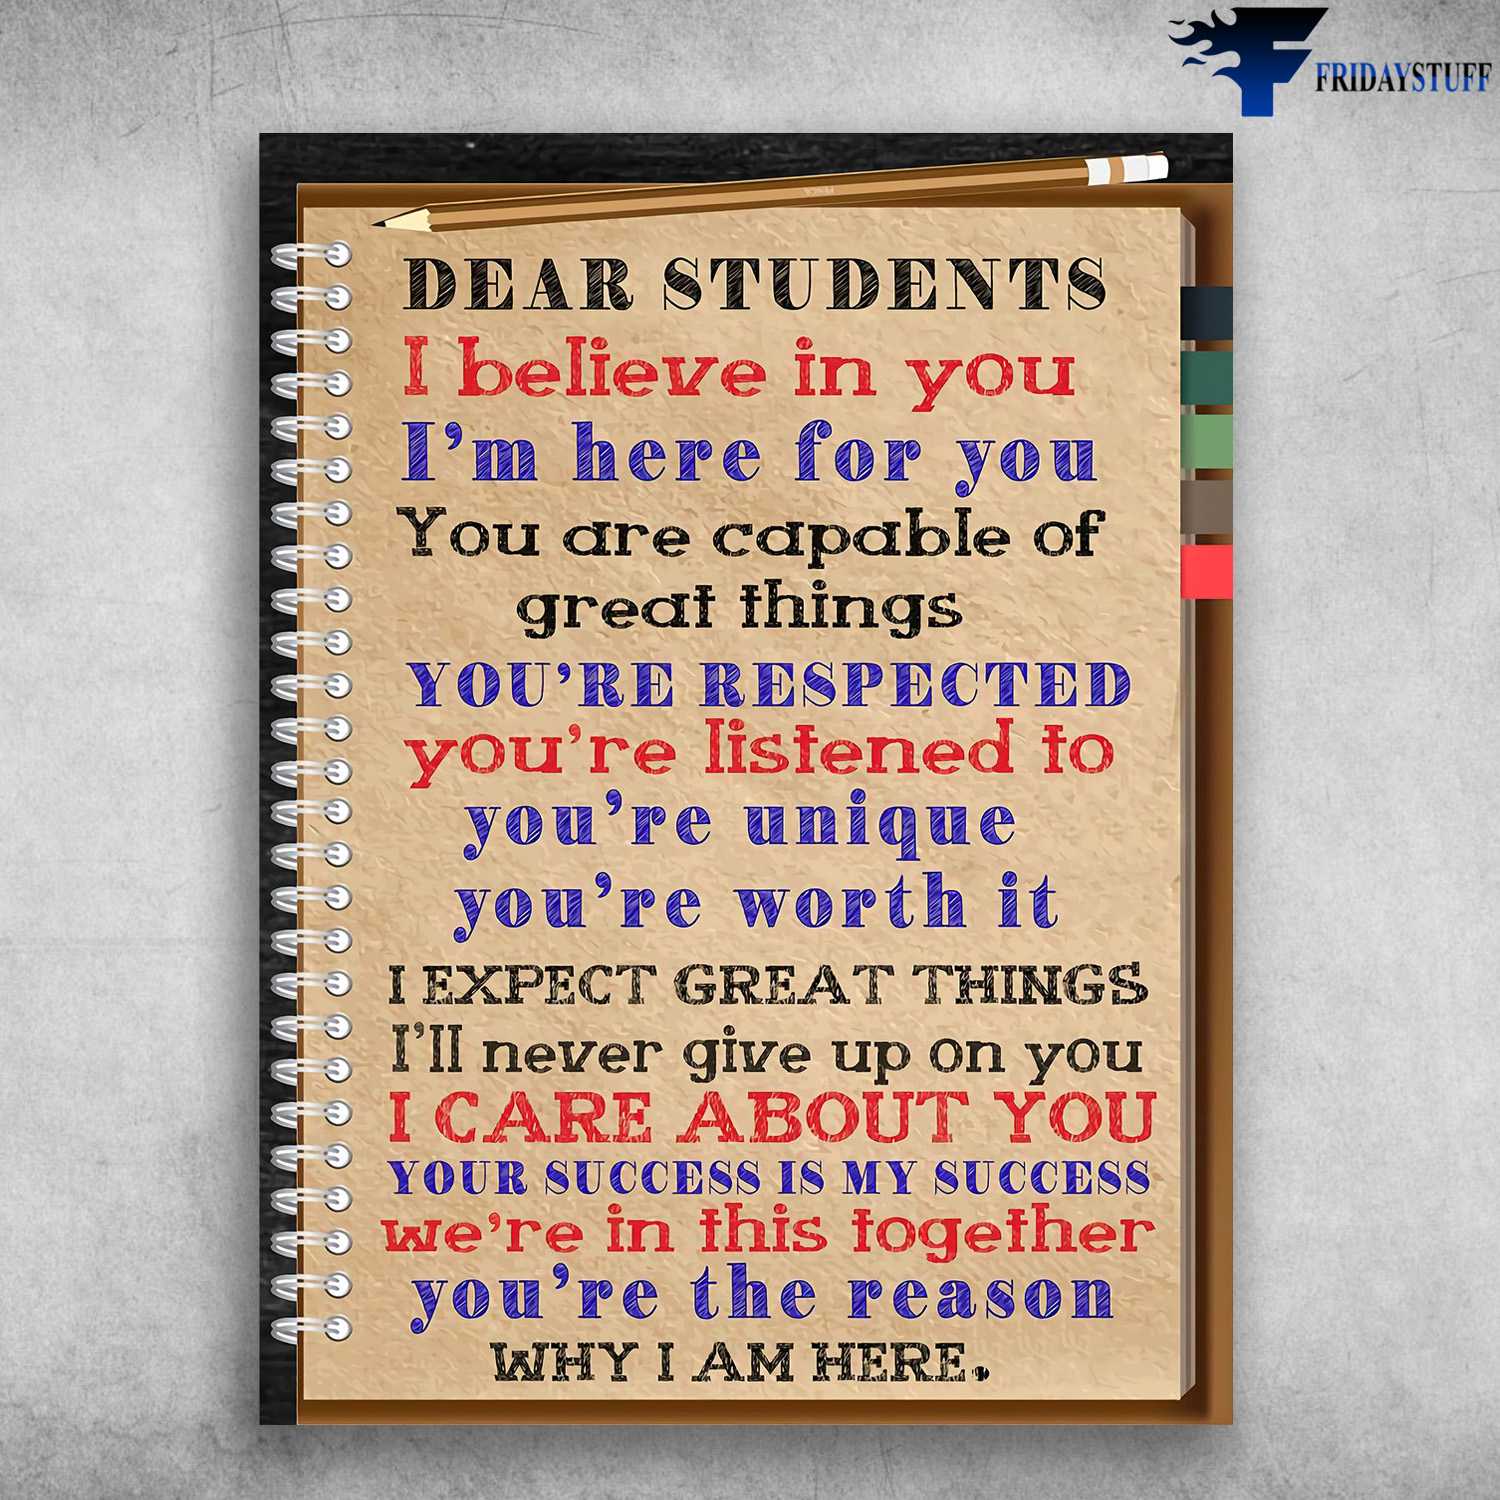 Classroom Poster, Teacher's Gift - Dear Students, I Believe In You, I'm Here For You, You Are Capable Of Gear Things, You're Listened To You're Unique, You're Worth It